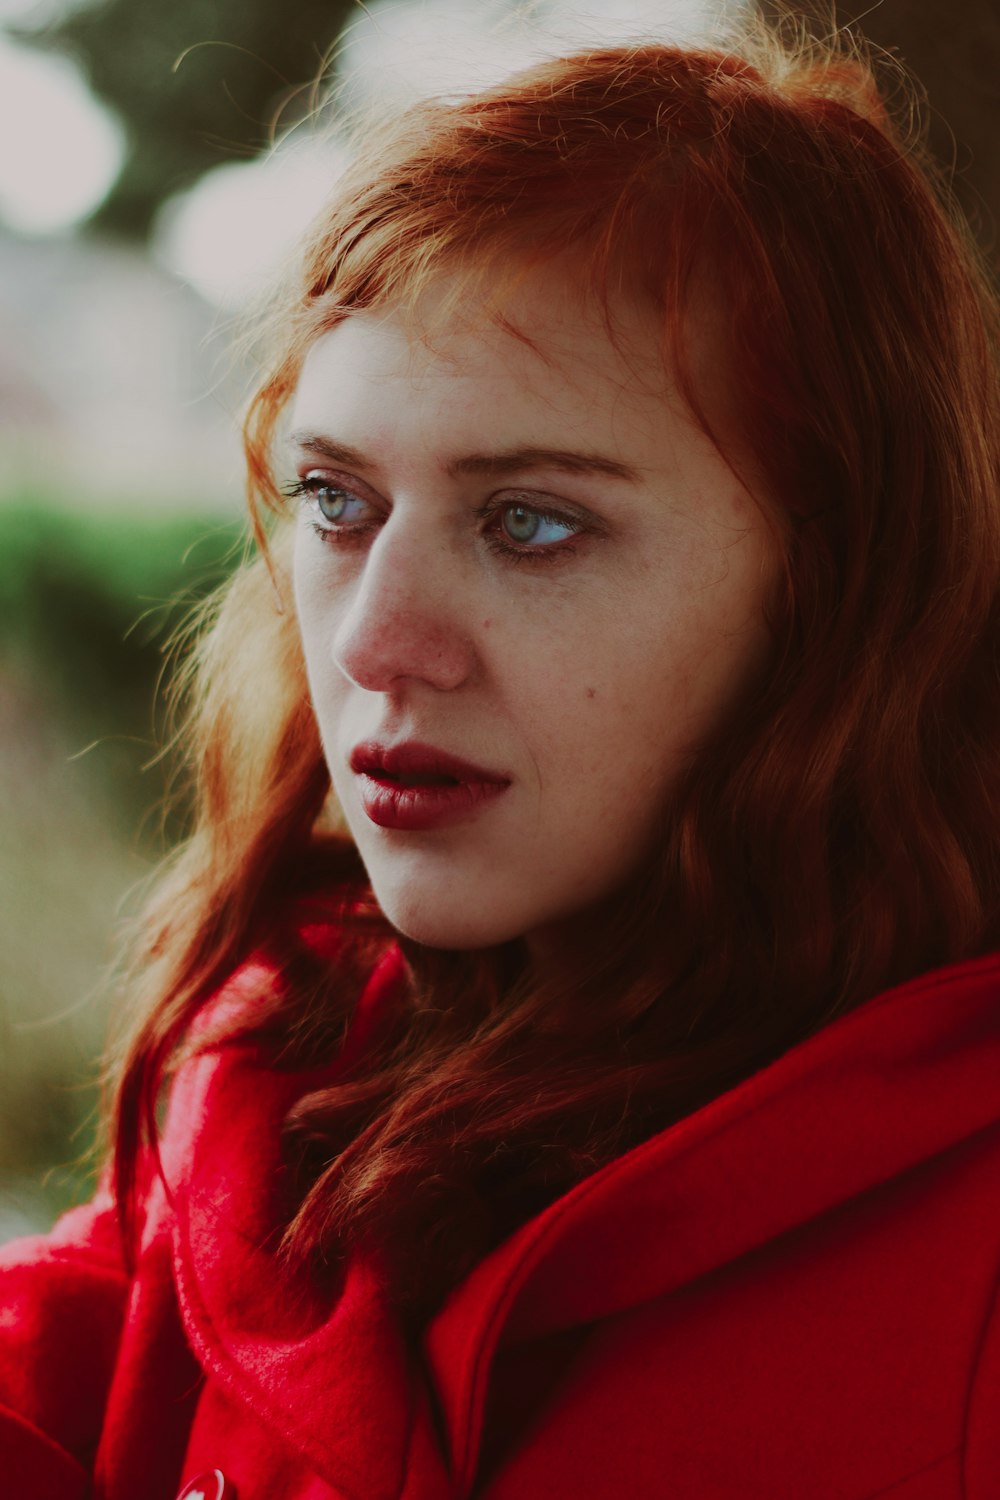 a close up of a person wearing a red jacket